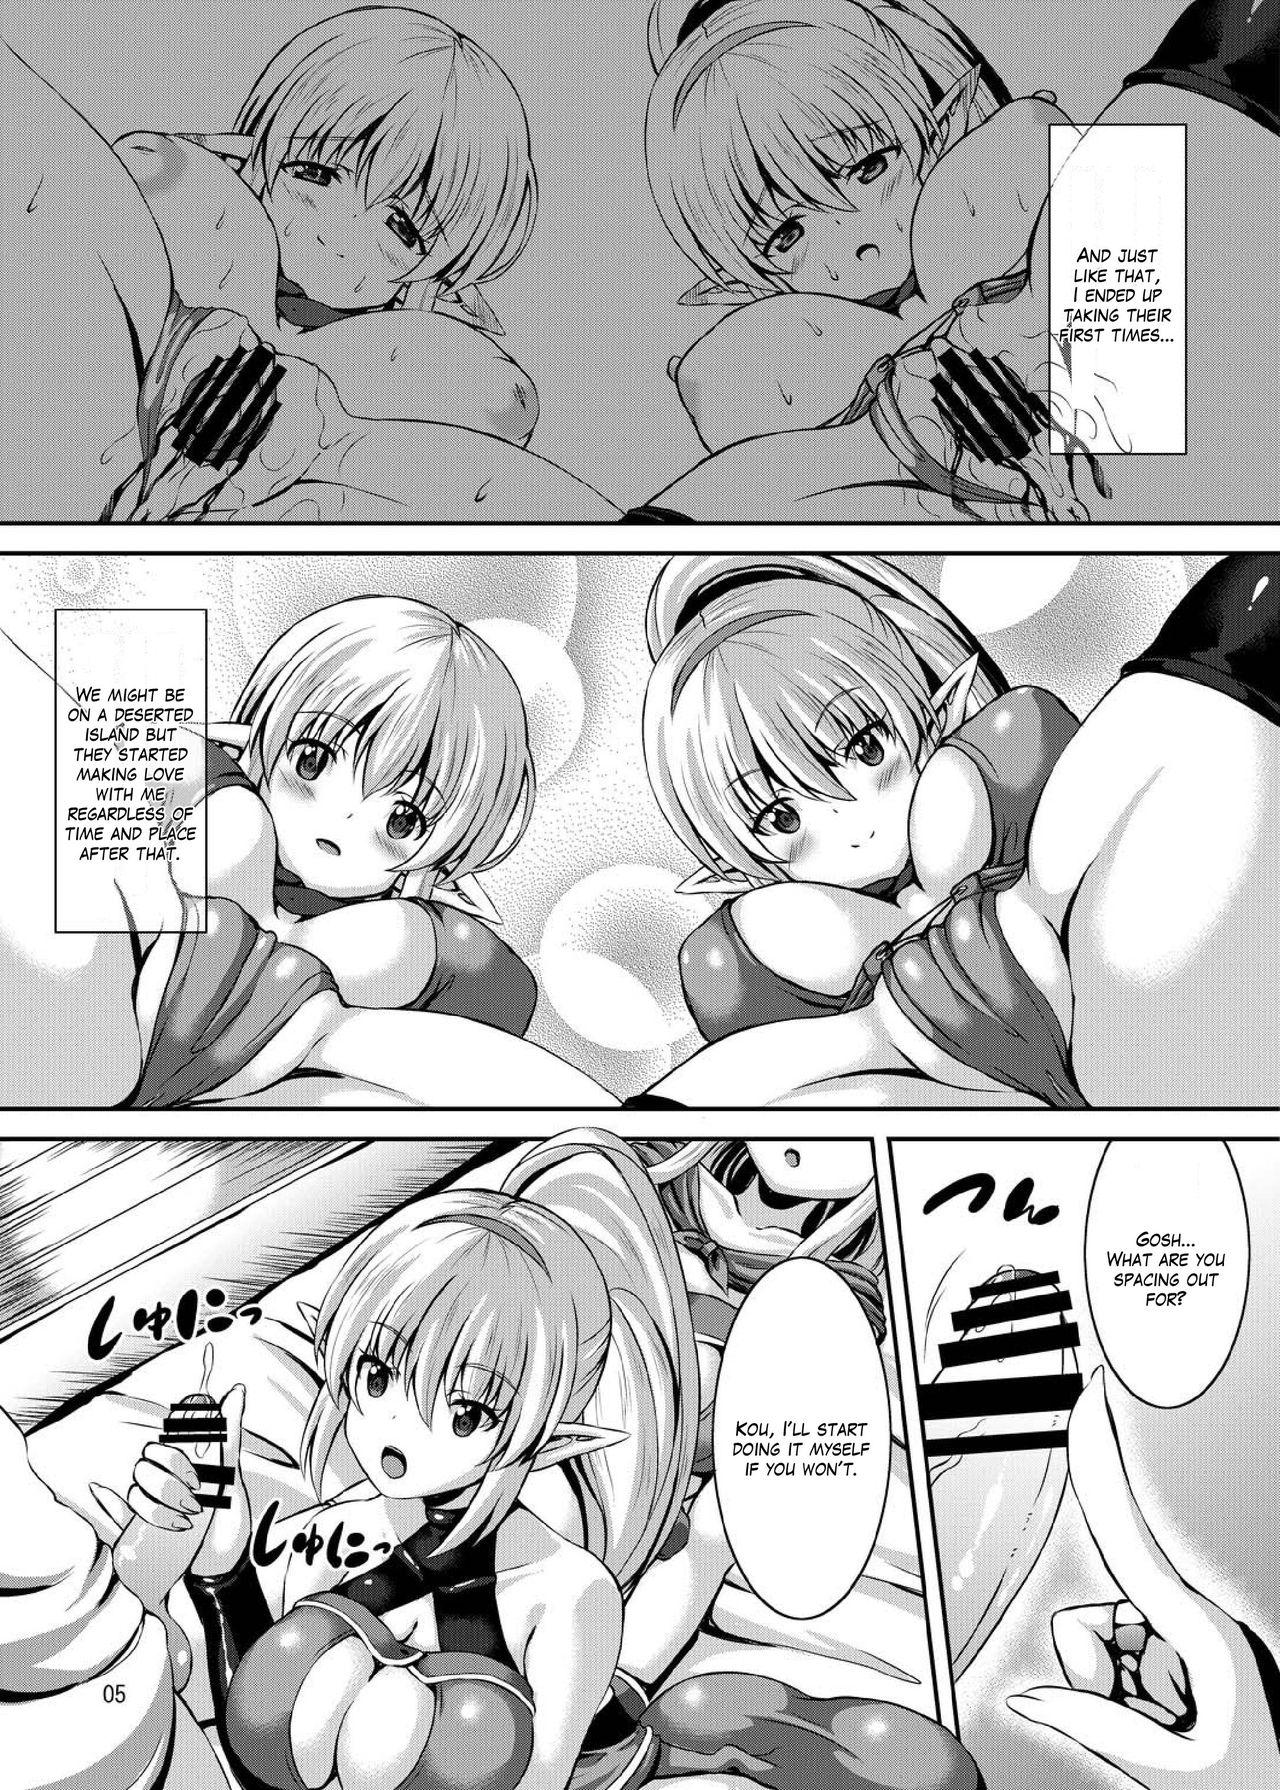 Rub Boku to Isekai no Onee-san | Me and The Ladies from Another World - Original Caught - Page 5